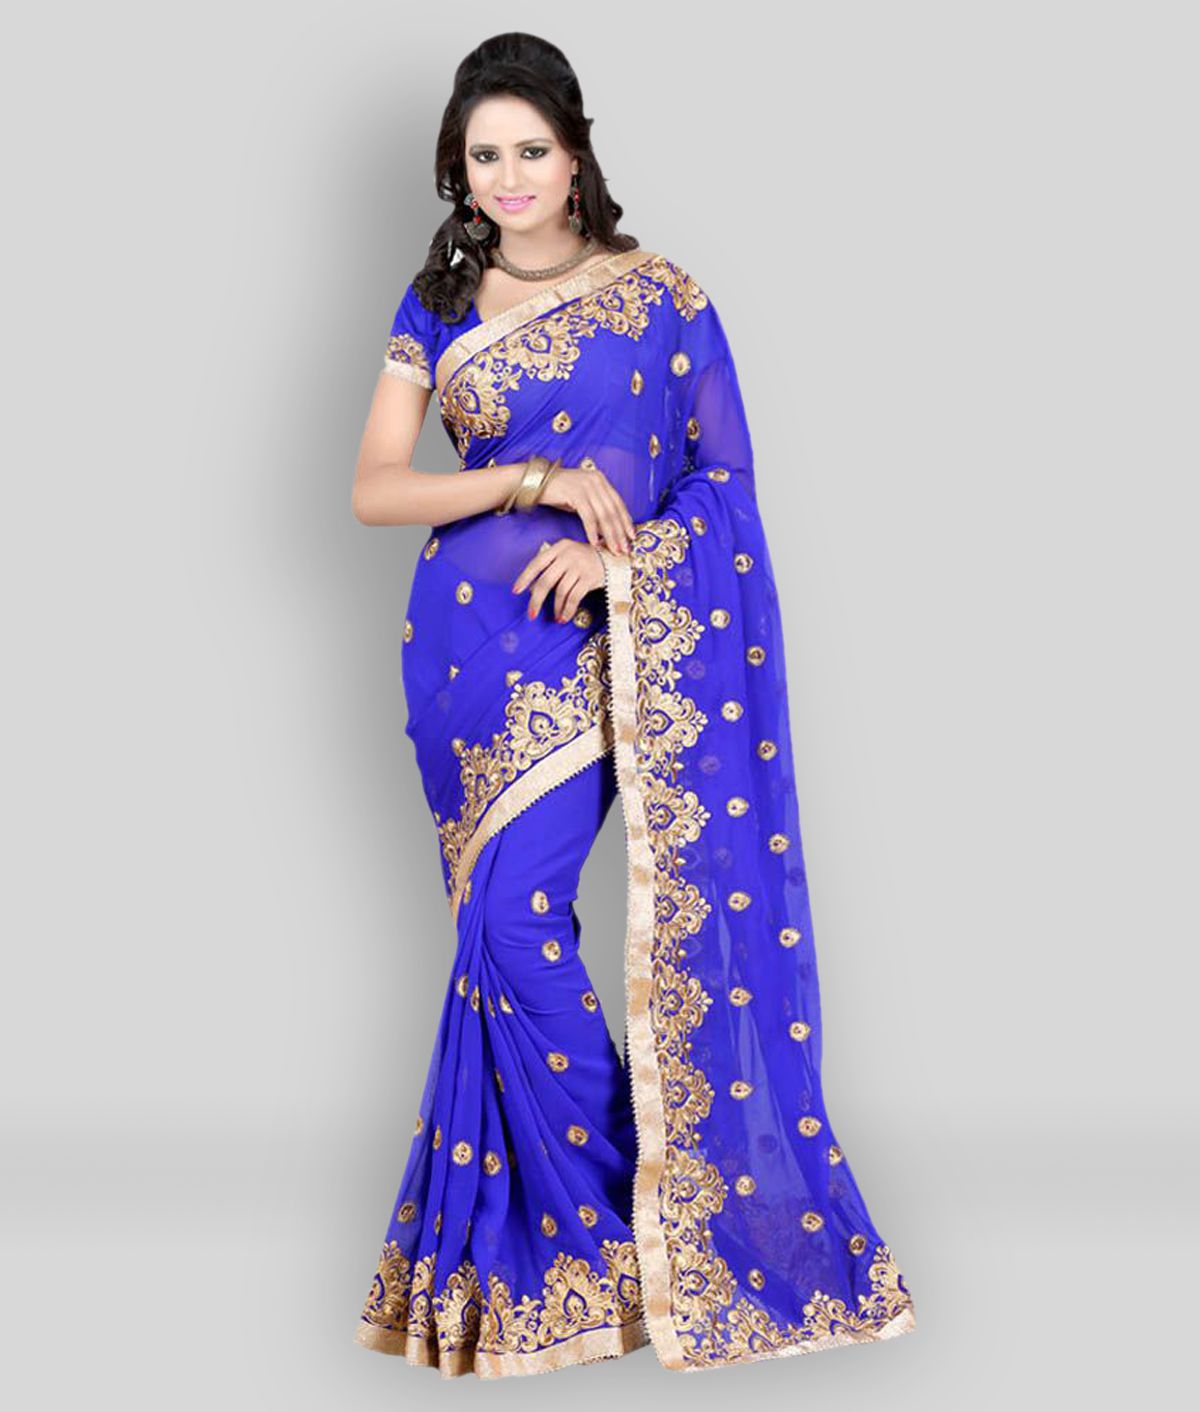     			Pahal Fashion - Blue Cotton Blend Saree With Blouse Piece (Pack of 1)